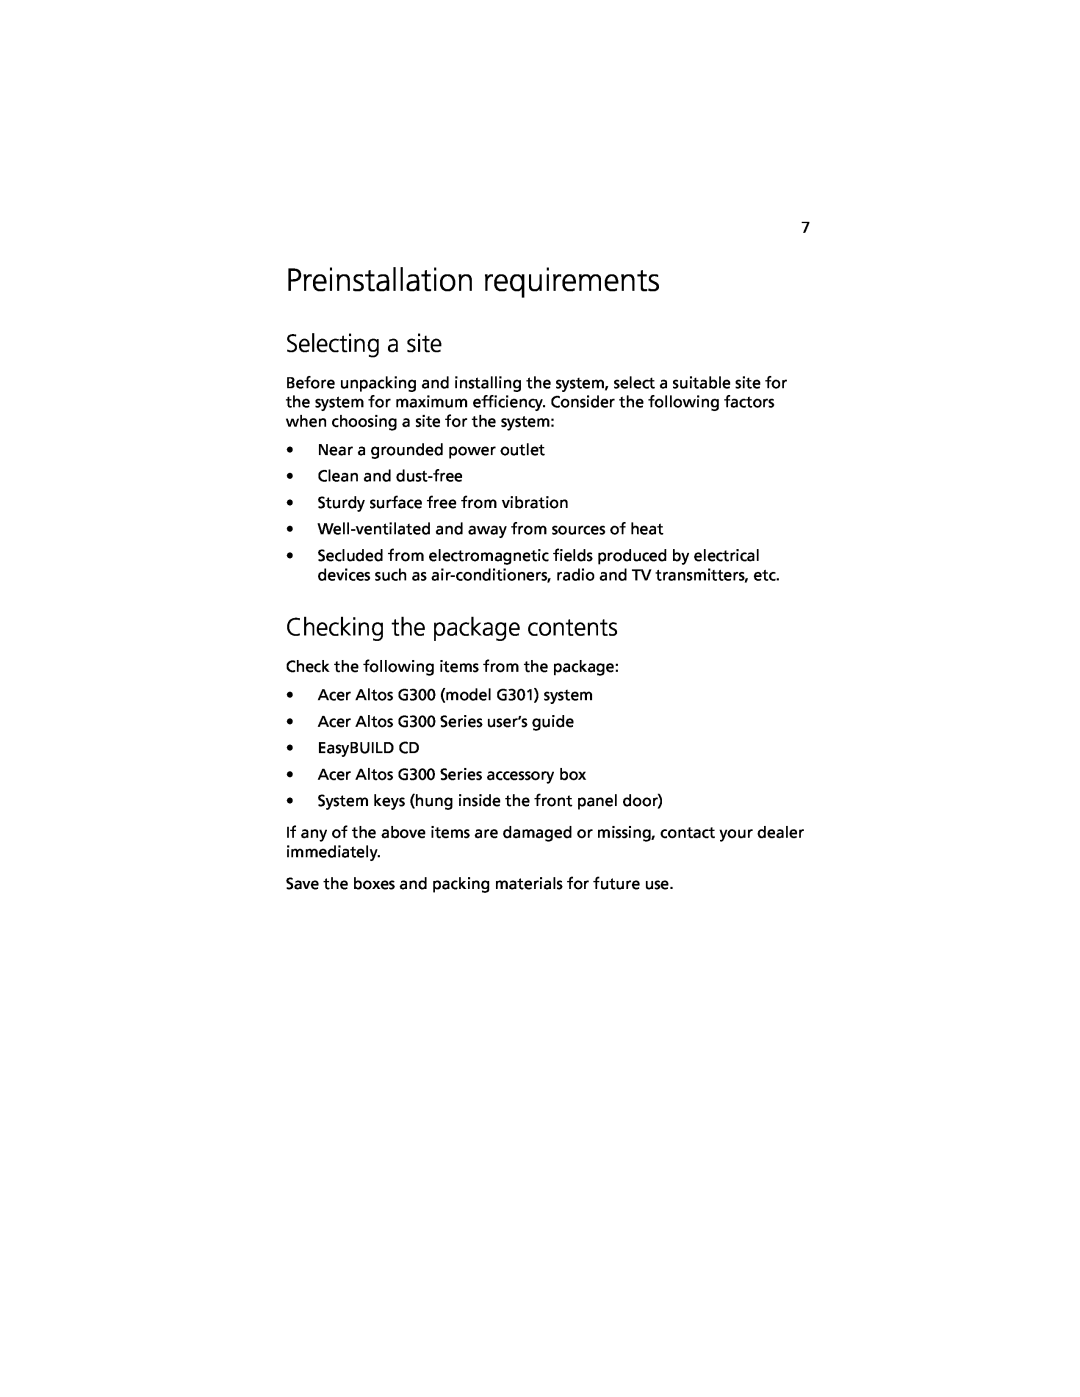 Acer G301 manual Preinstallation requirements, Selecting a site, Checking the package contents 